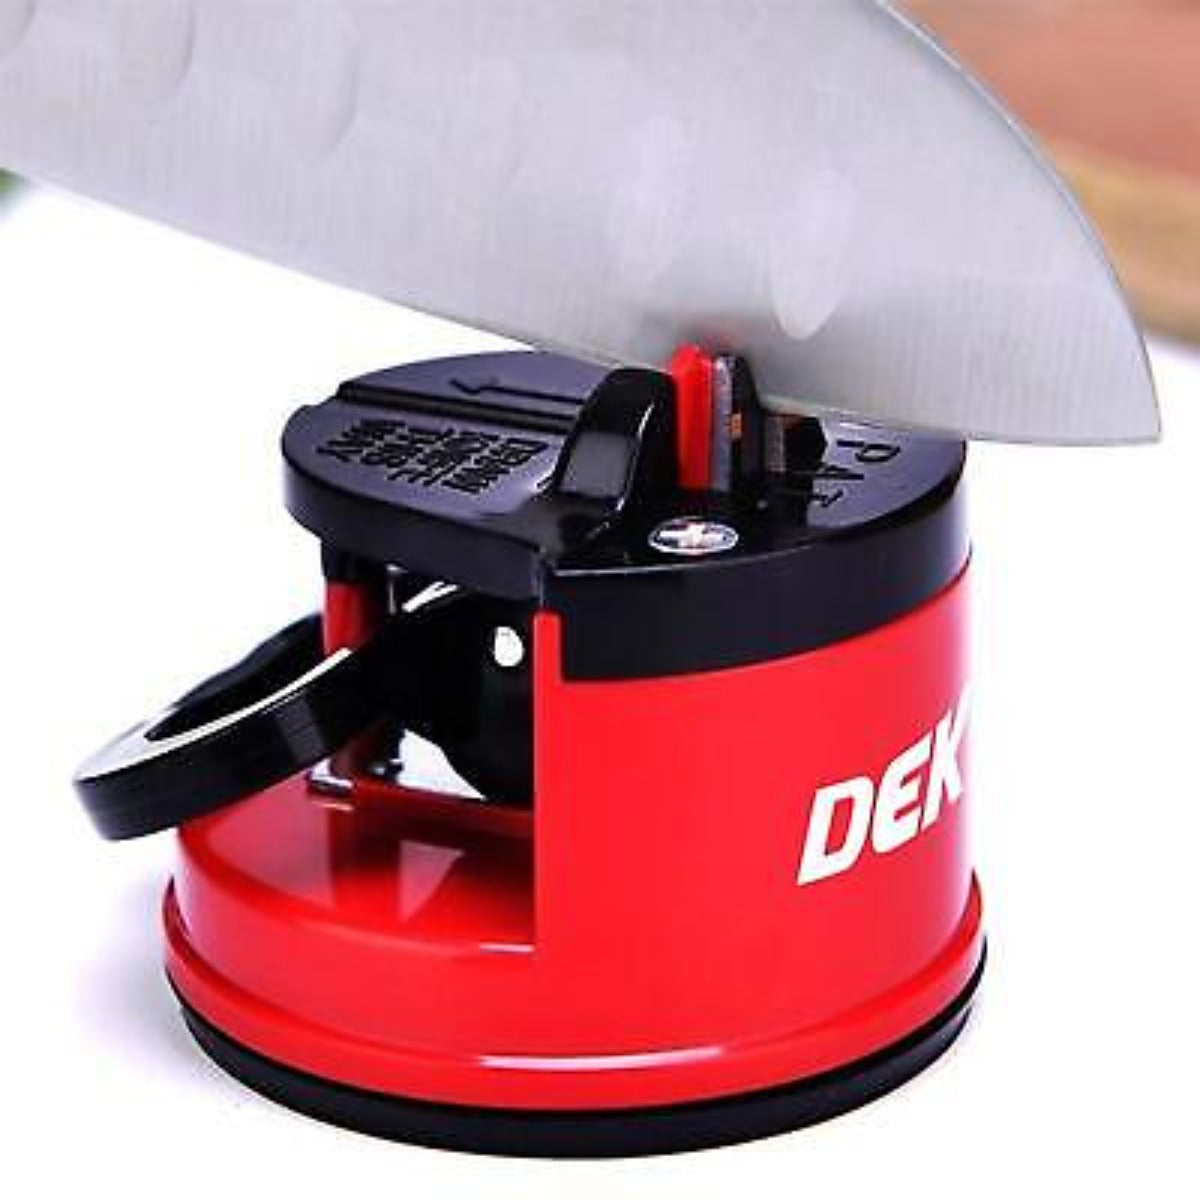 DEKTON Knife Sharpener With Suction Cup Base